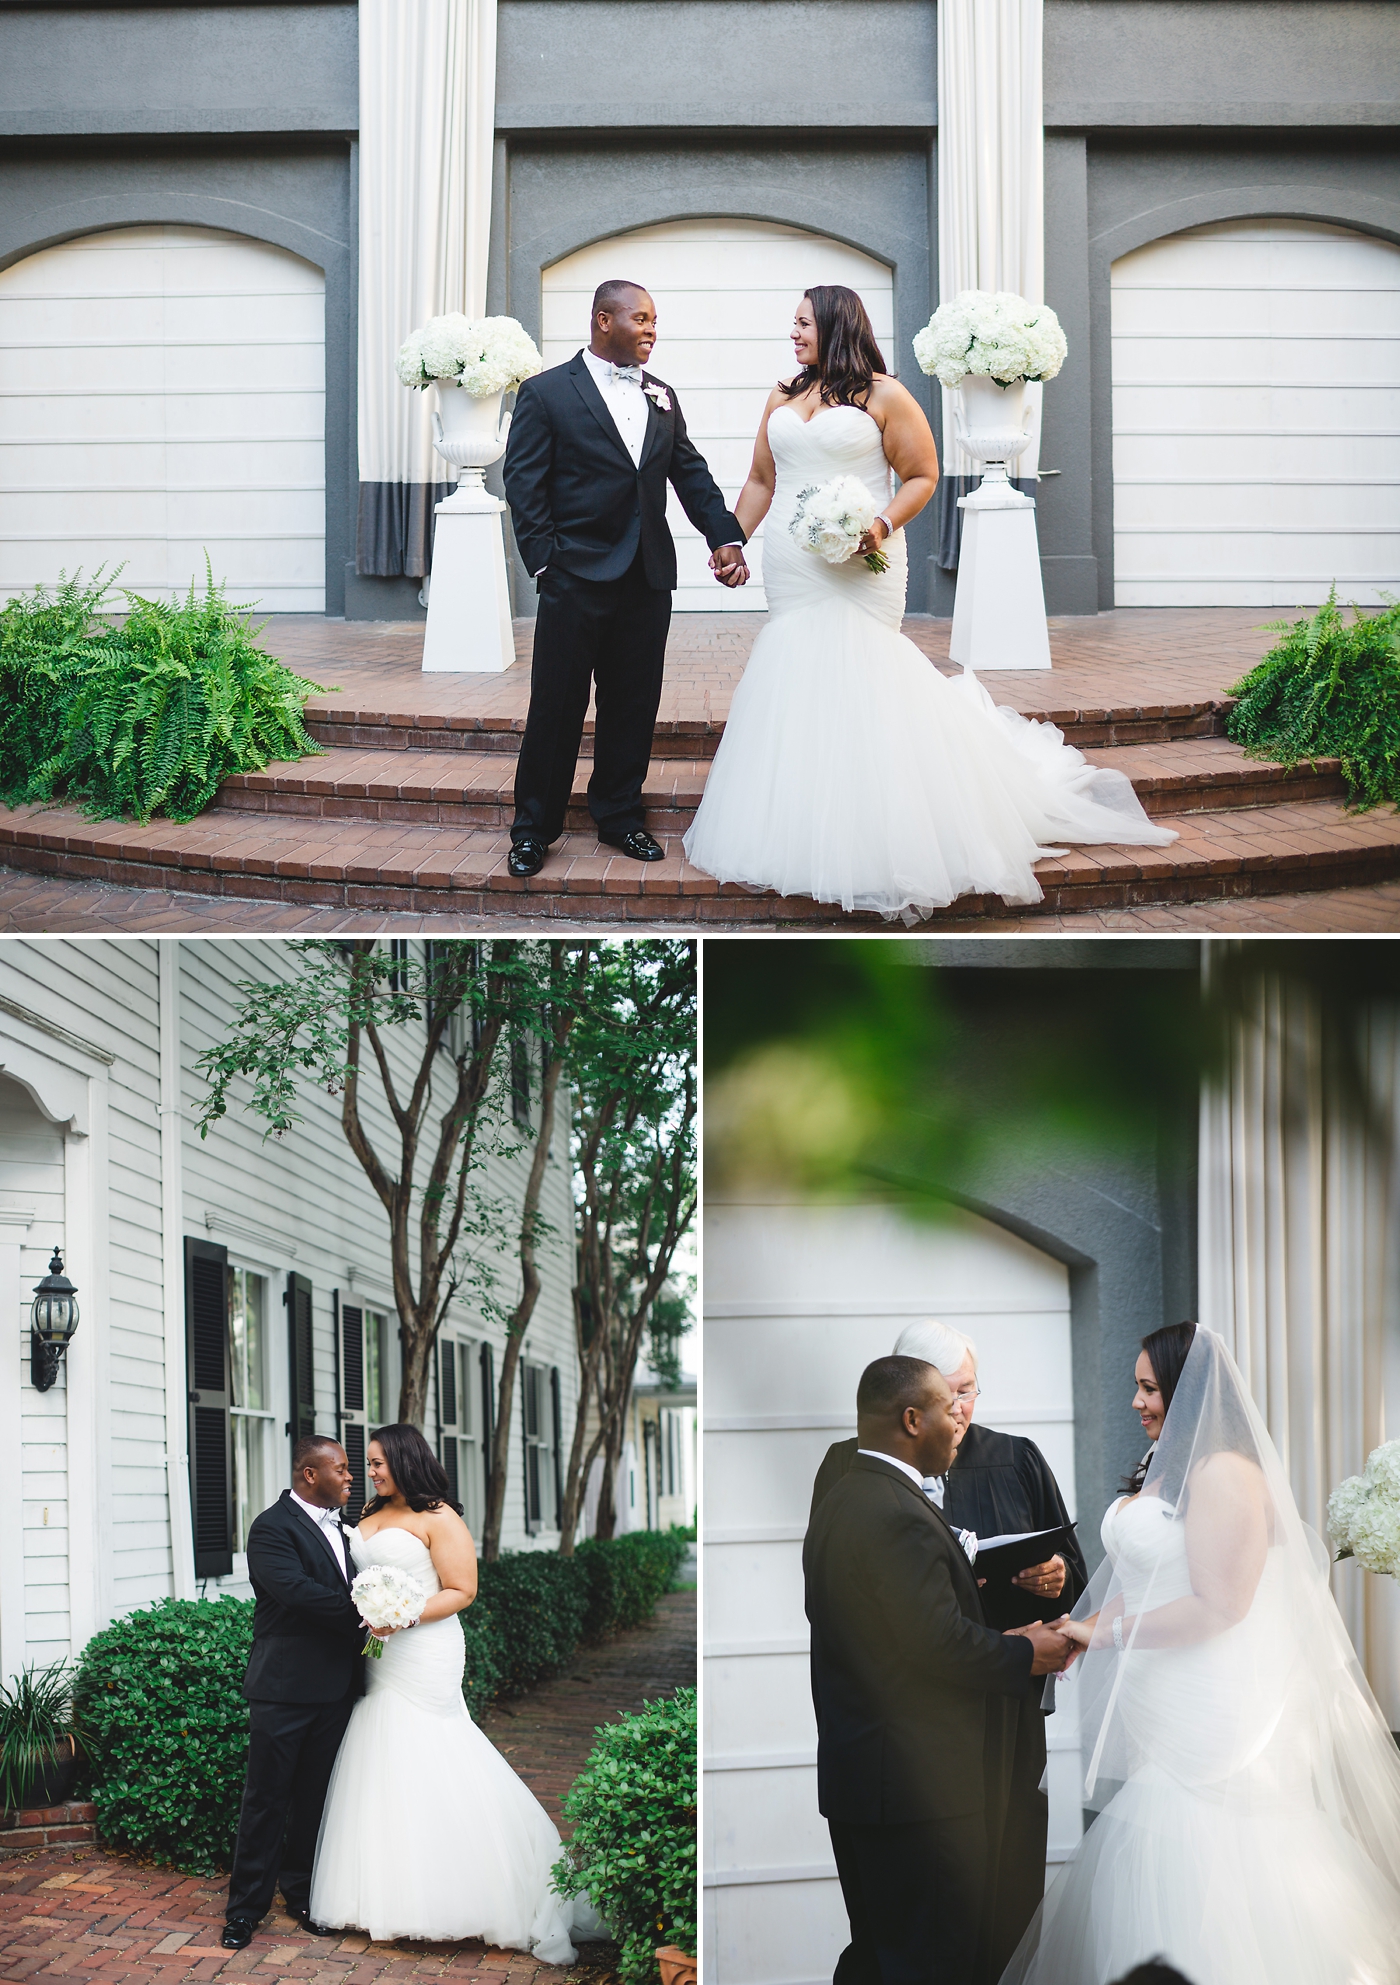 The Brice Hotel Elopement - Izzy and Co.